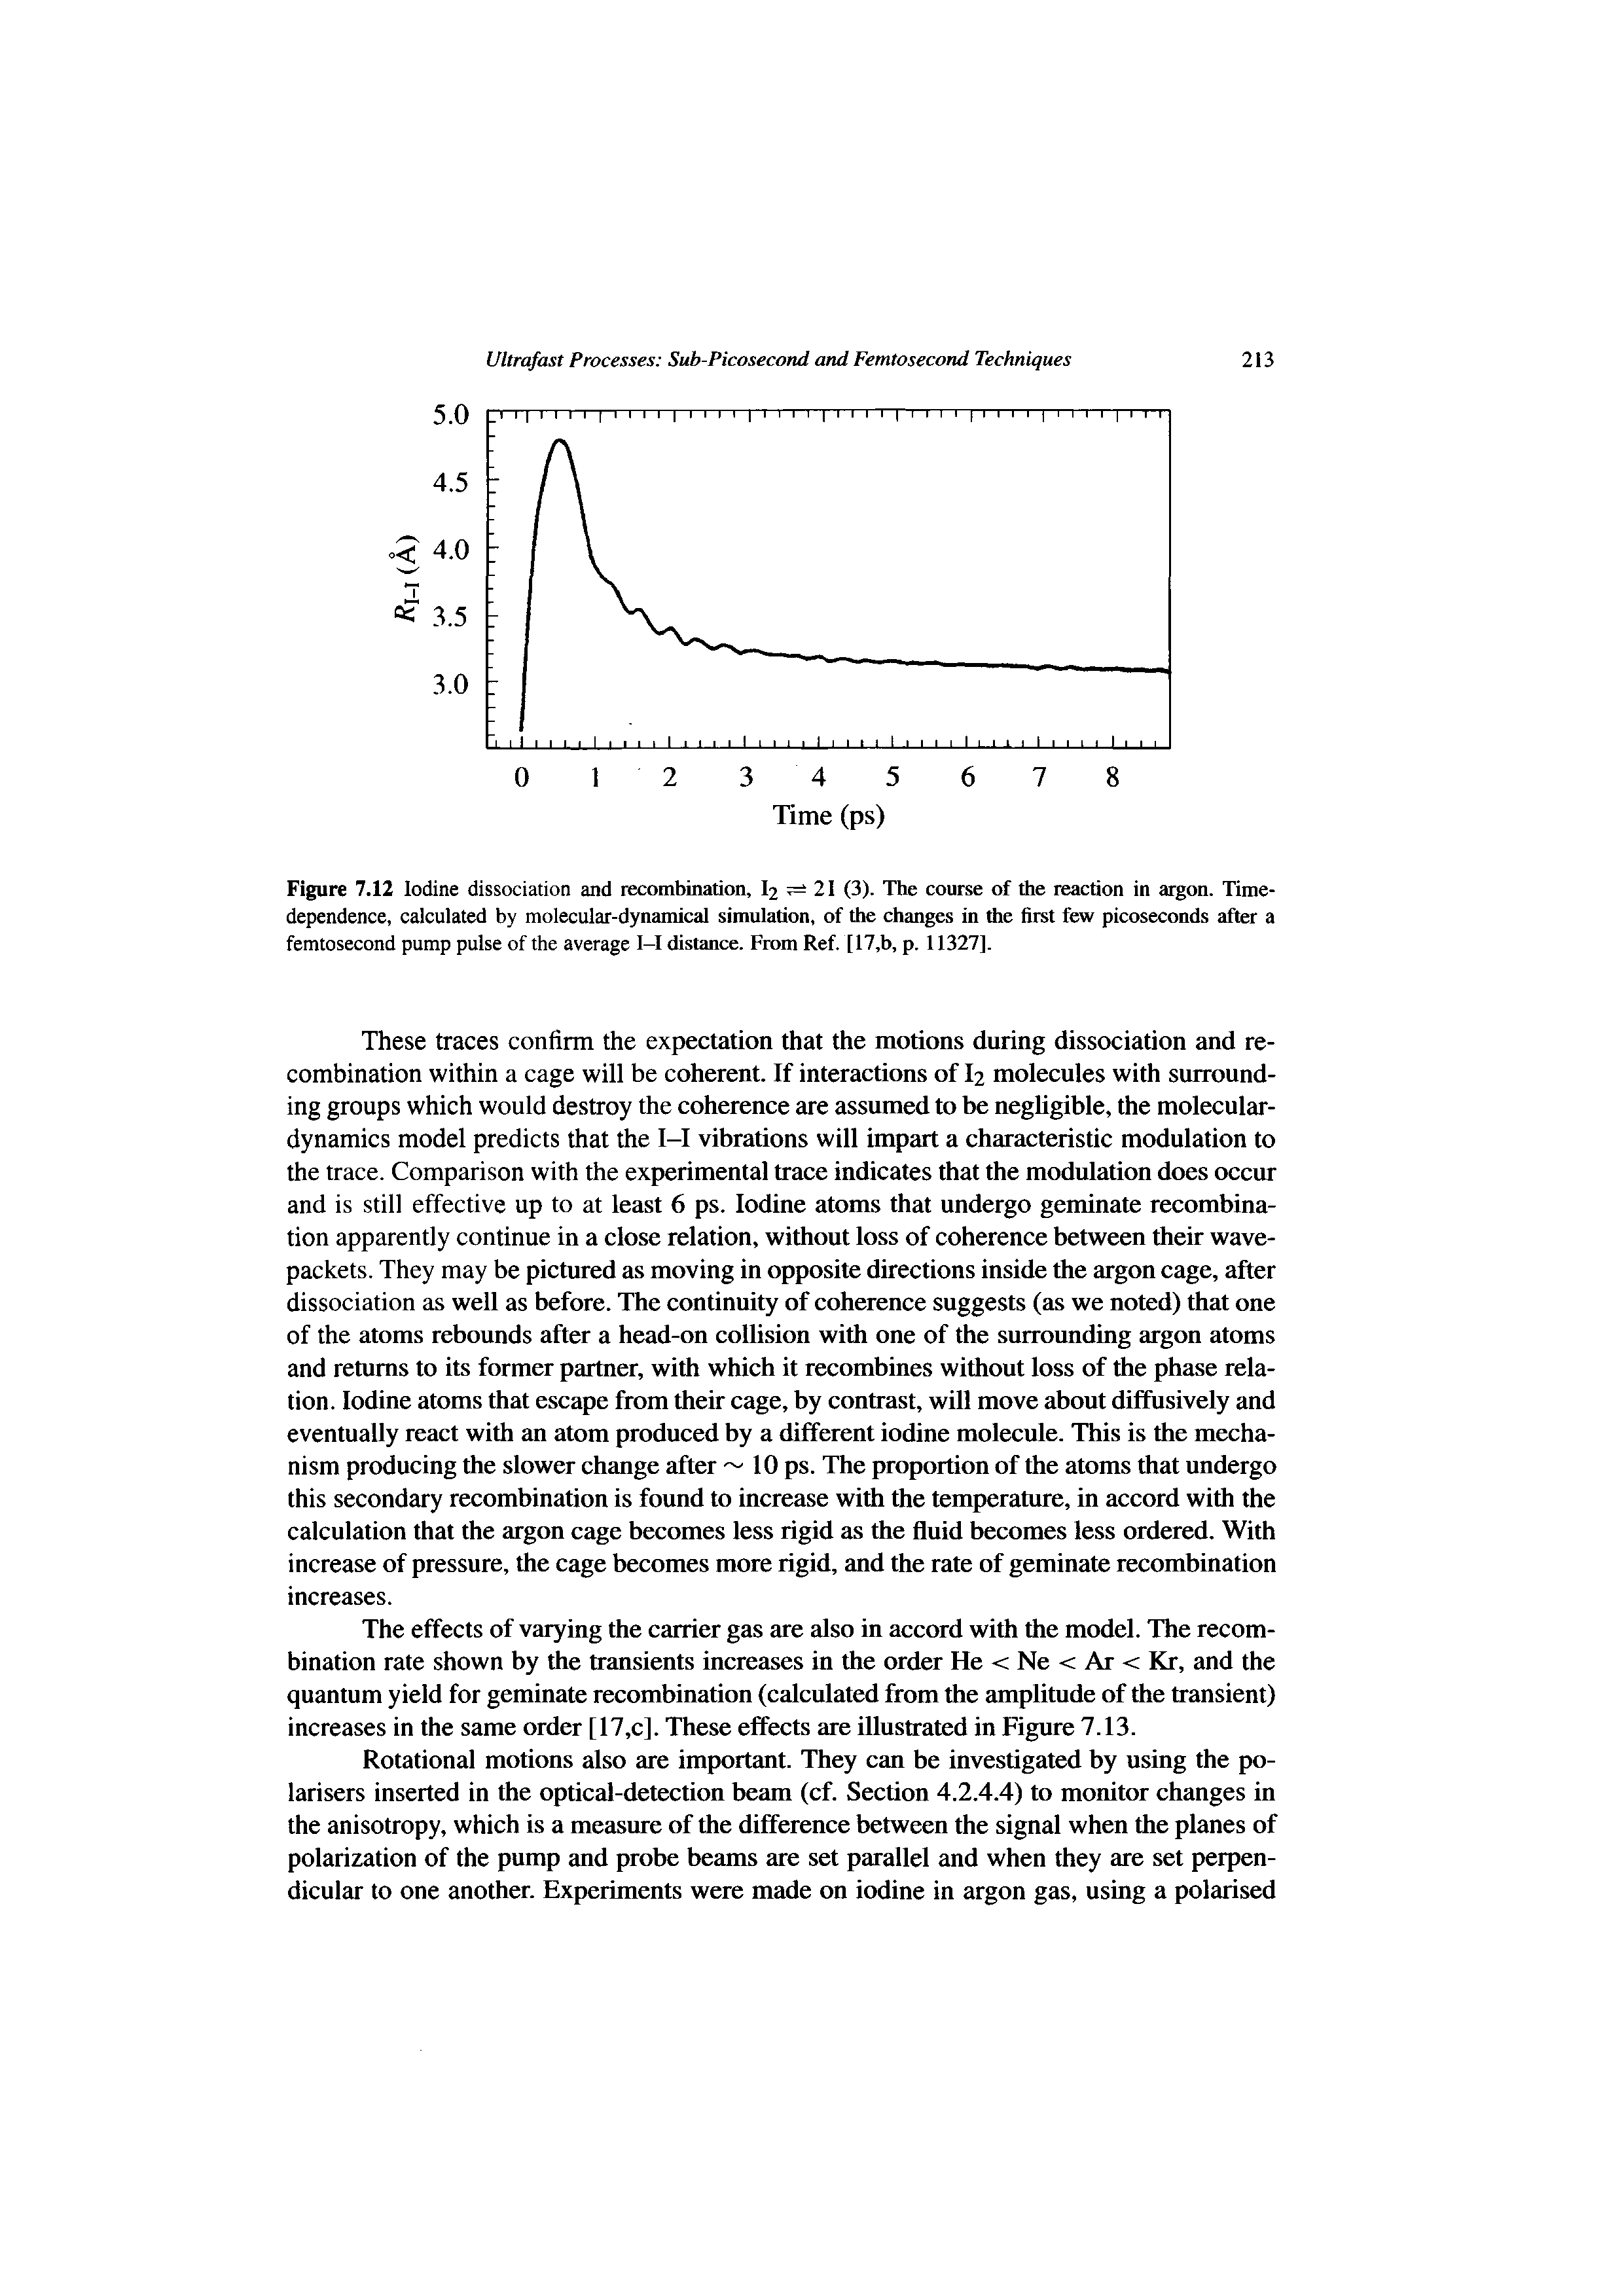 Figure 7.12 Iodine dissociation and recombination, I2 21 (3). The course of the reaction in argon. Time-dependence, calculated by molecular-dynamical simulation, of the changes in the first few picoseconds after a femtosecond pump pulse of the average I-I distance. From Ref. [17,b, p. 11327].